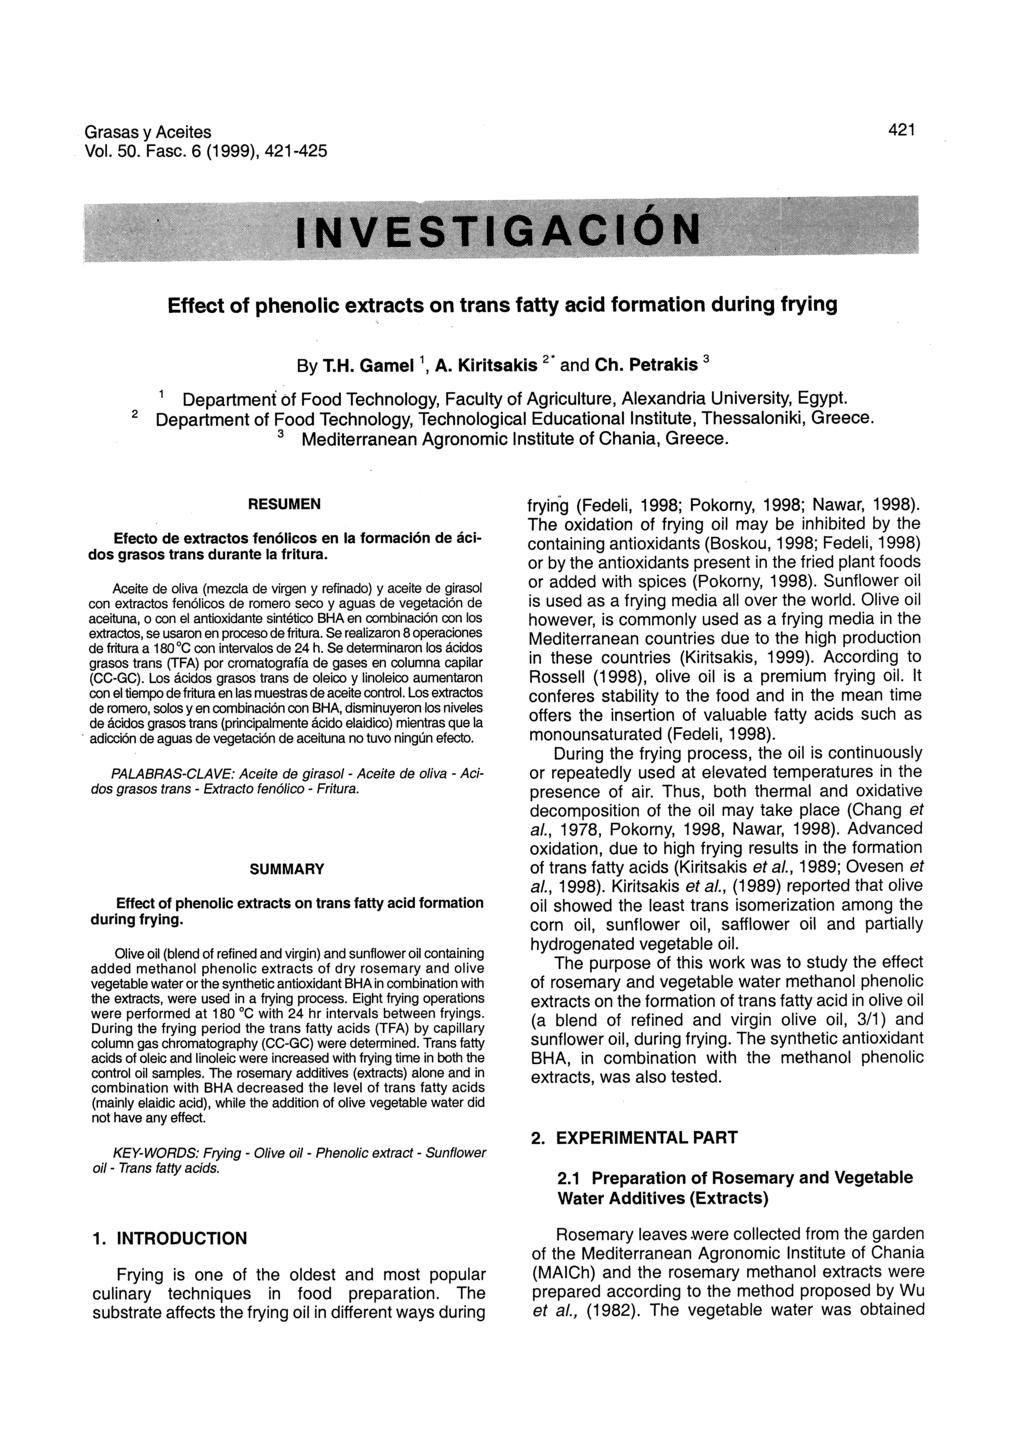 Grasas y Aceites Vol. 50. Fase. 6 (1999), 421-425 421 INVESTIGACIÓN Effect of phenolic extracts on trans fatty acid formation during frying By TH. Gamel \ A. Kiritsakis ^* and Ch.